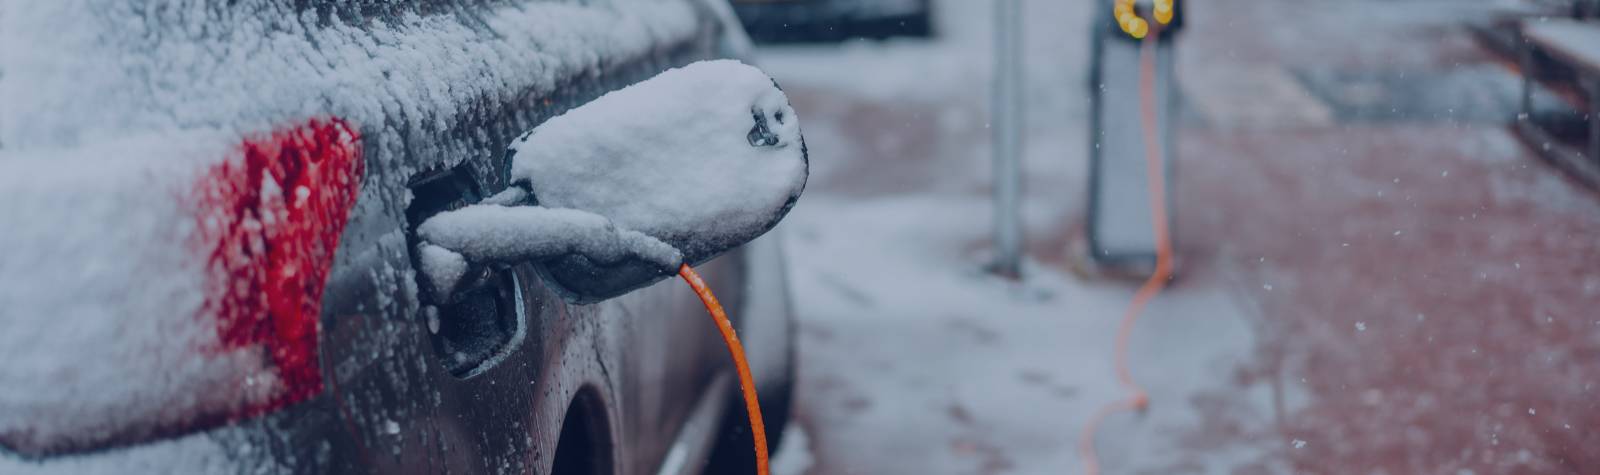 Tips for Electric Vehicle Maintenance During Winter